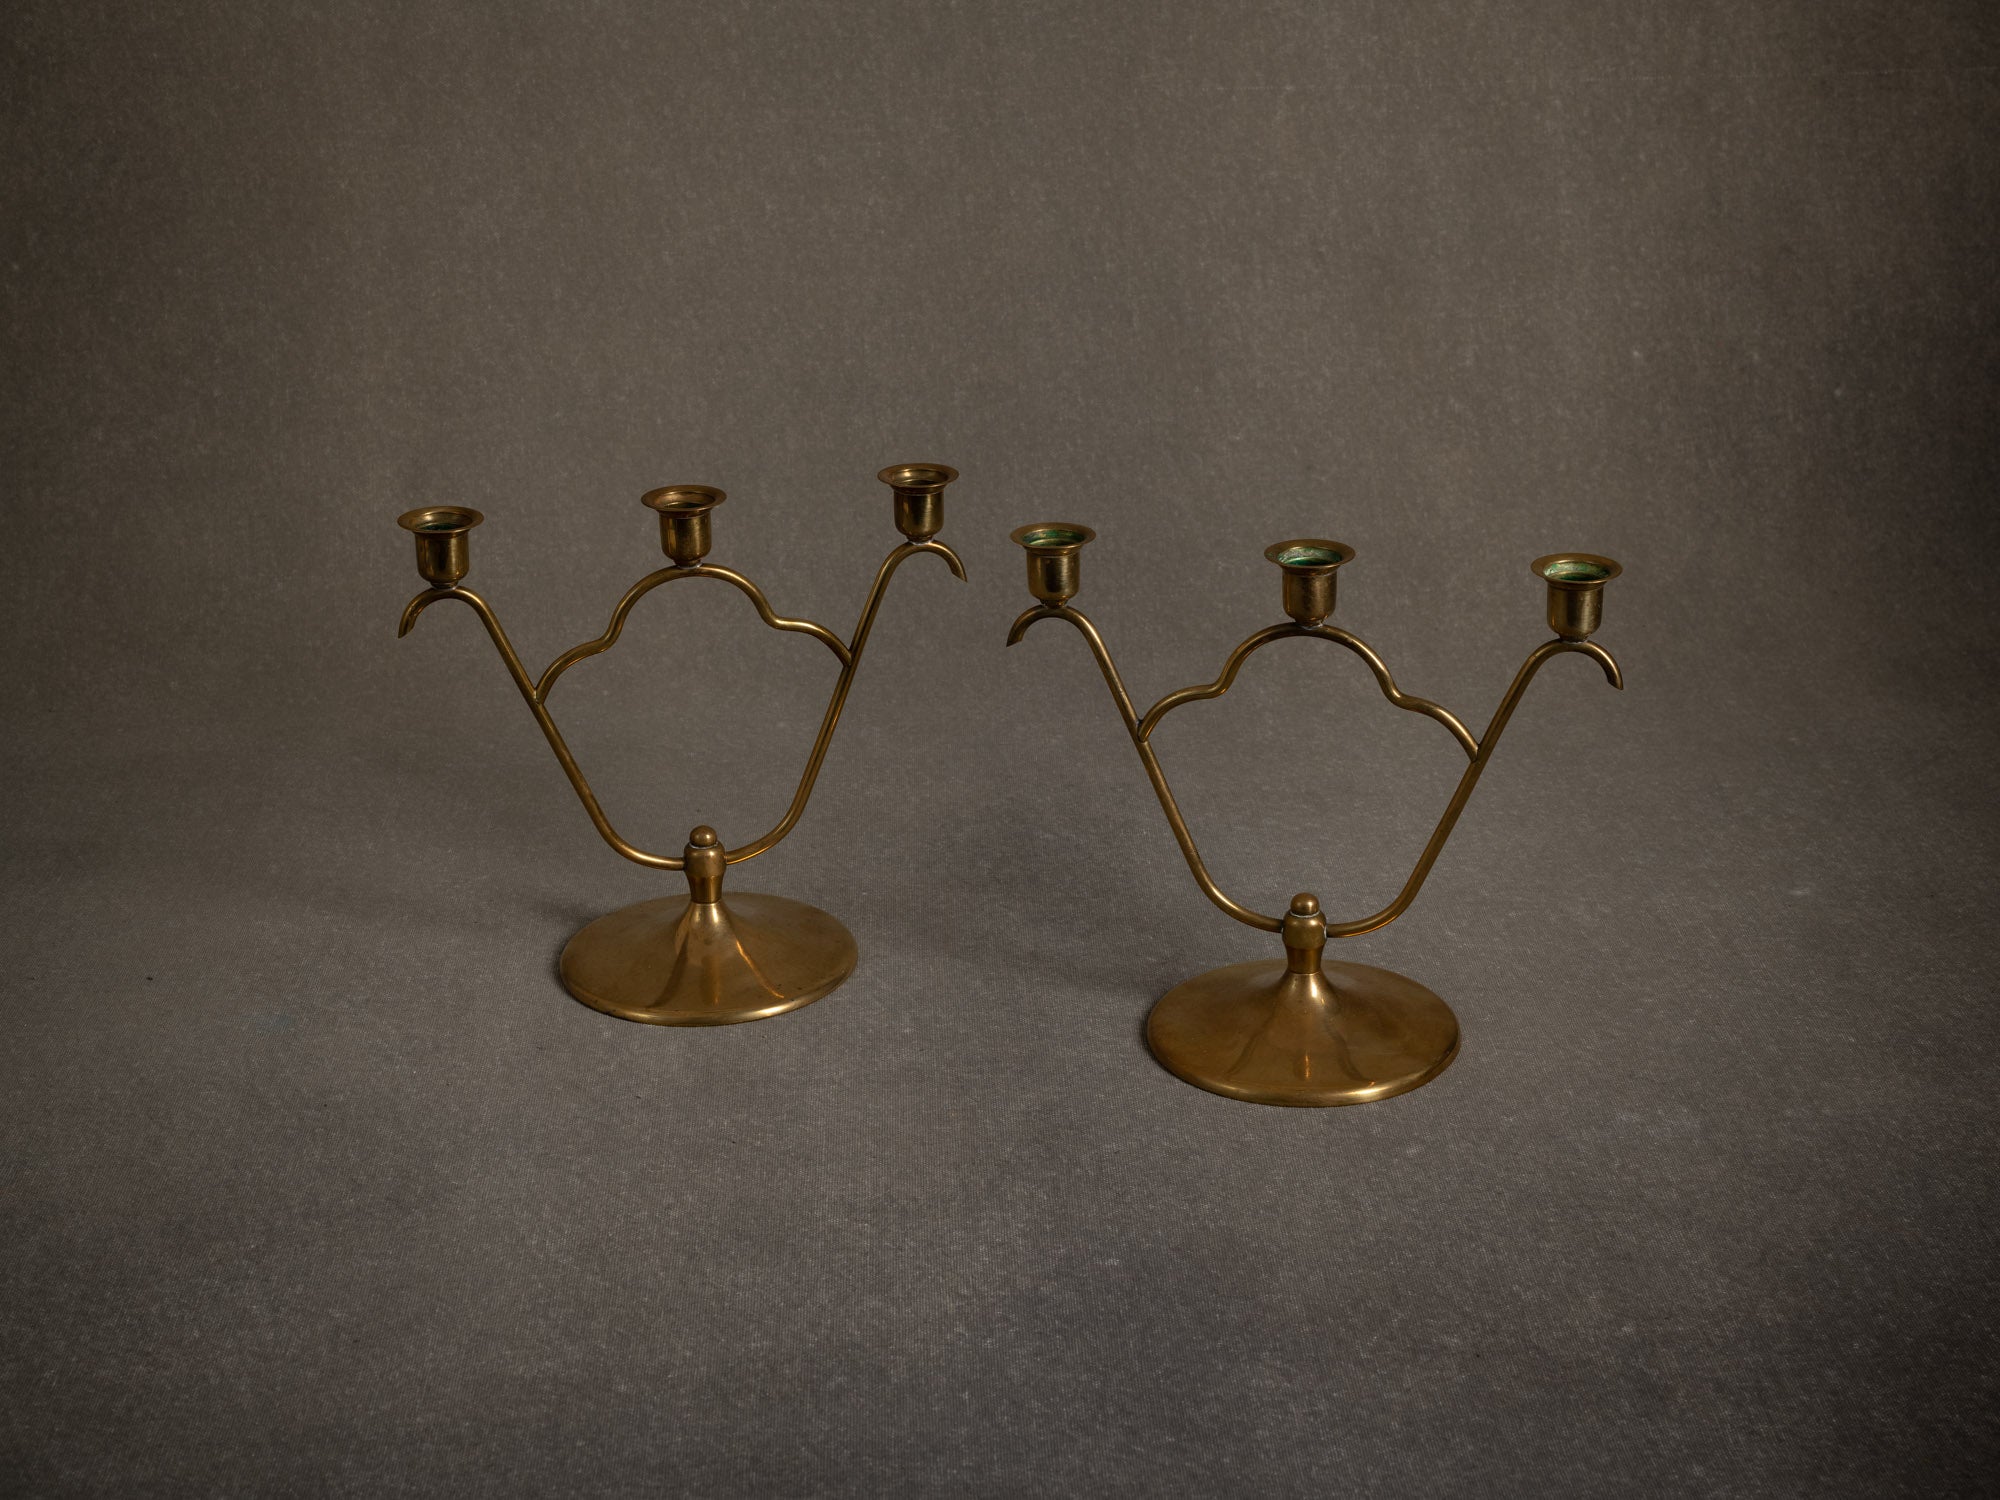 Paire de bougeoirs / candélabres de table en laiton par O.H. Lagerstedt, Suède (vers 1930-40)..Pair of brass "swedish grace" candle holders / table candelabra by O.H. Lagerstedt, Sweden (circa 1930-40)